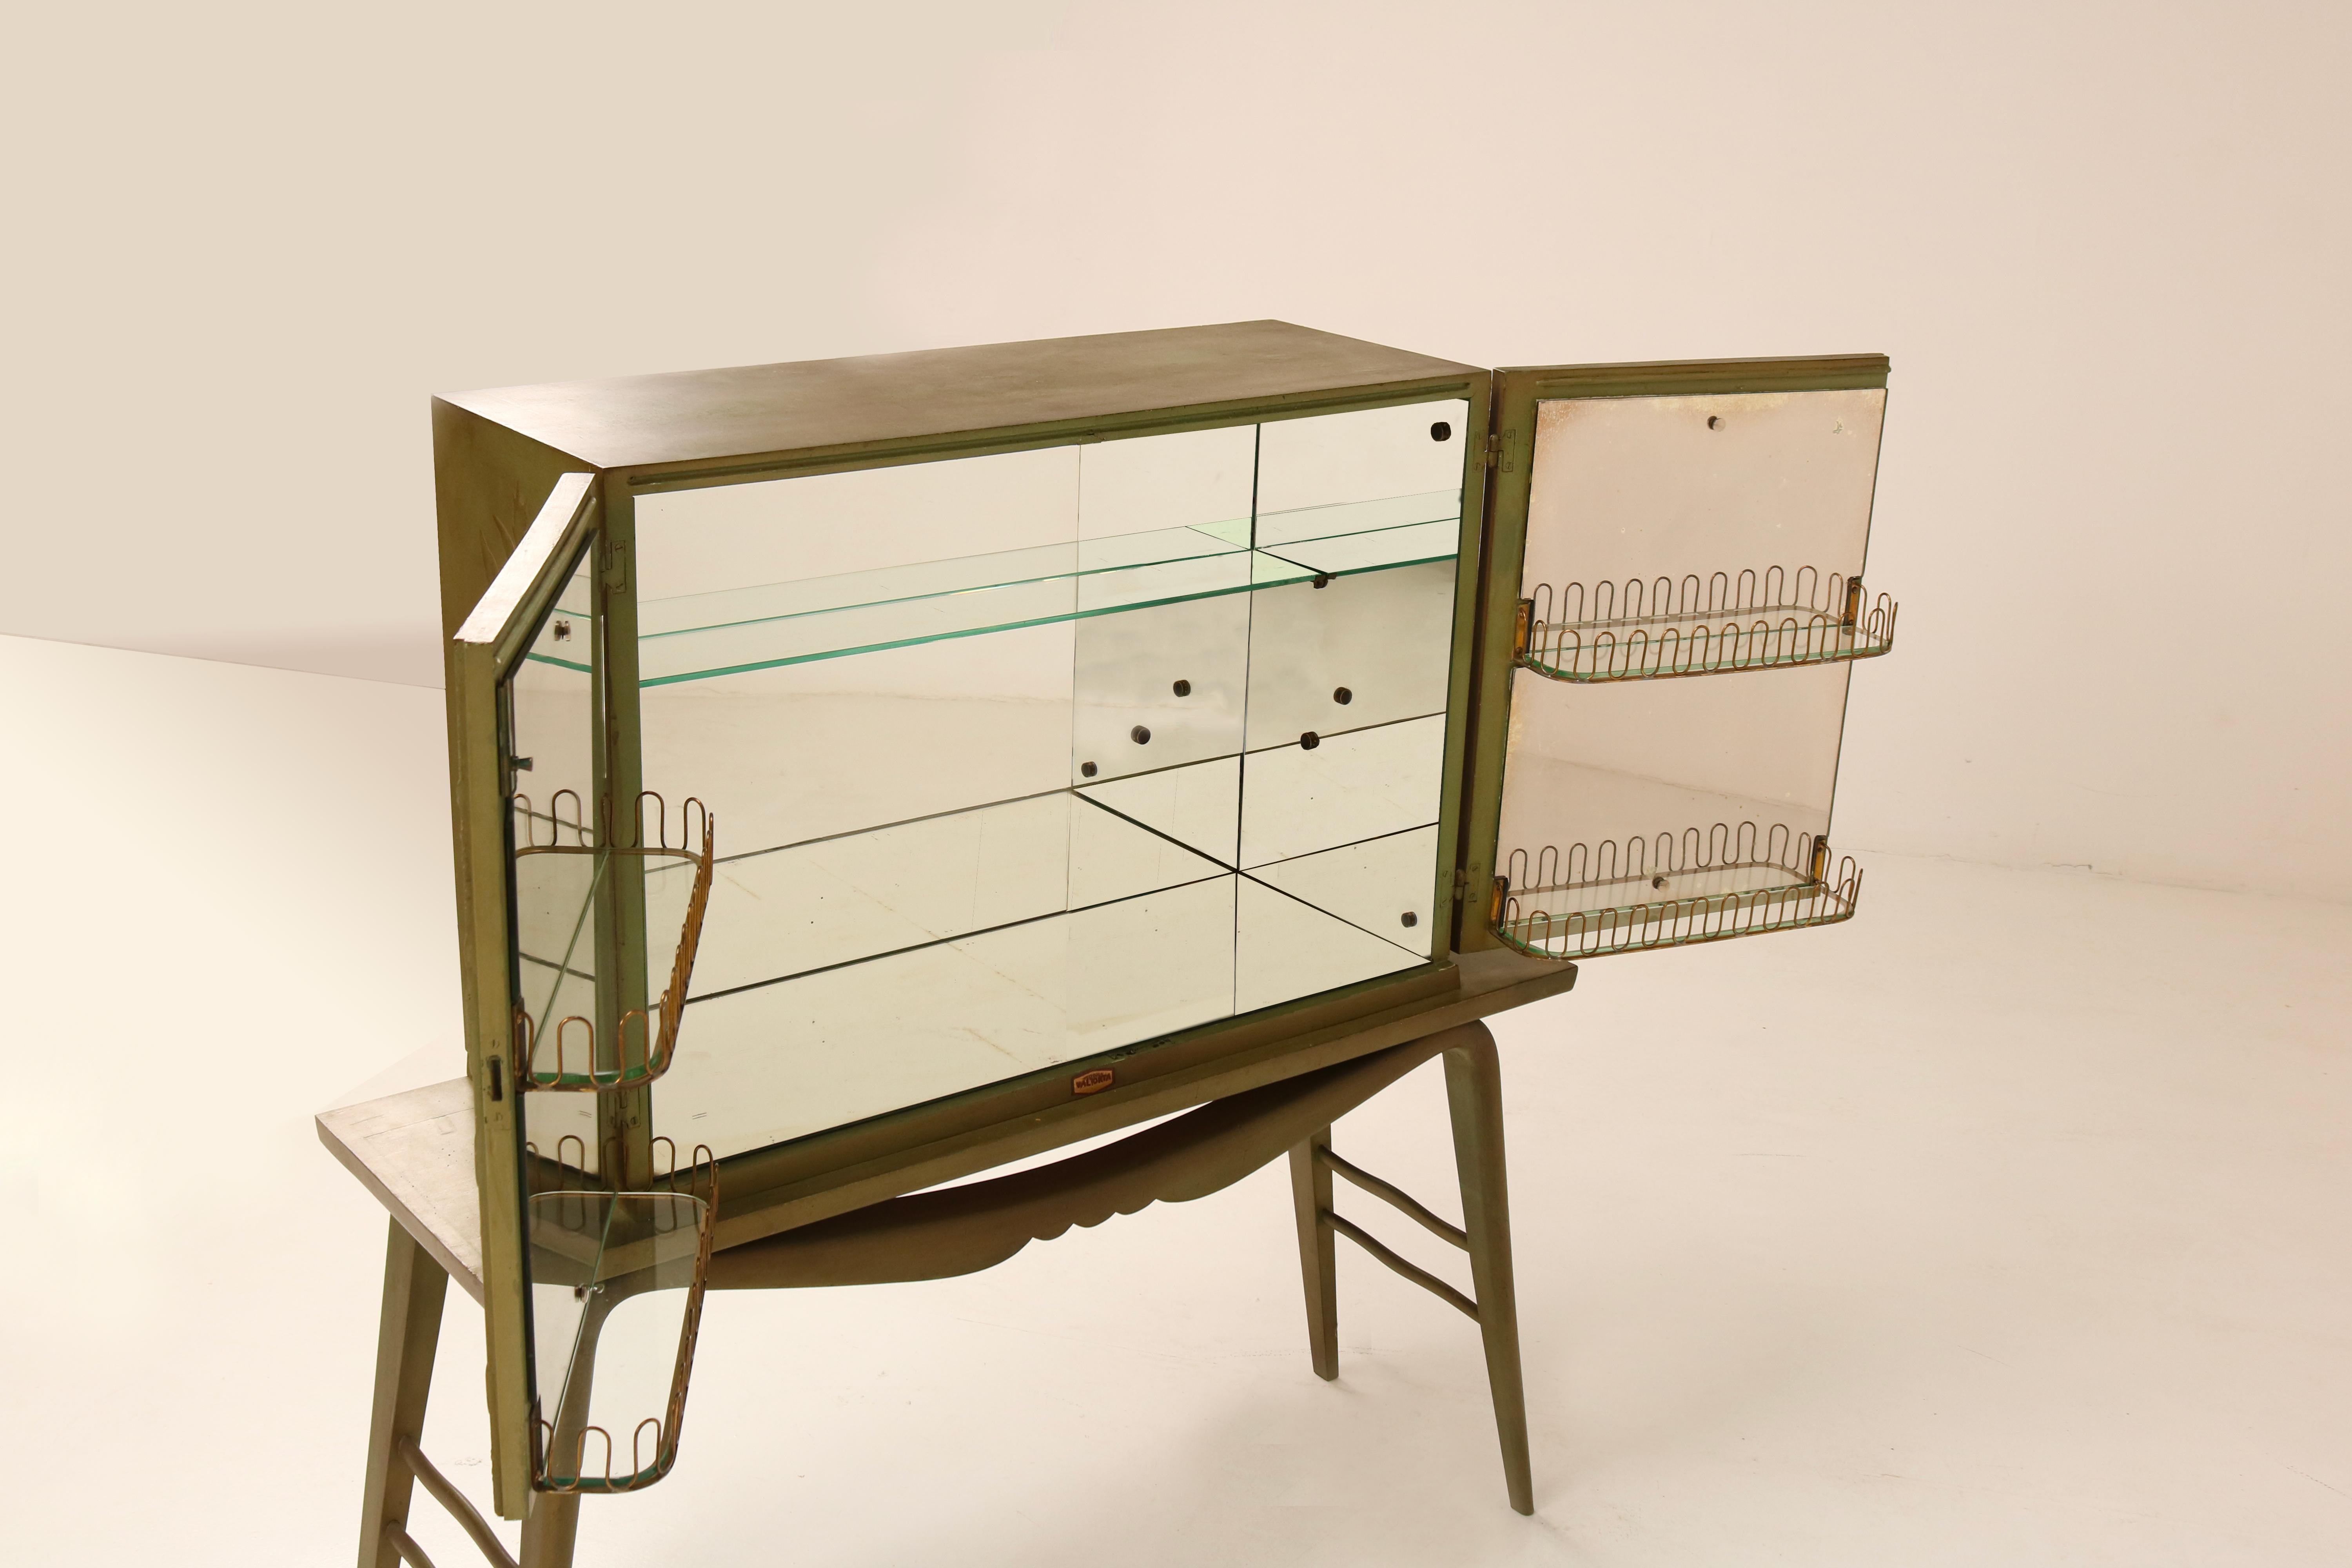 Painted wood and mirrored glass bar cabinet by Valtorta, Italian design 1930s For Sale 5